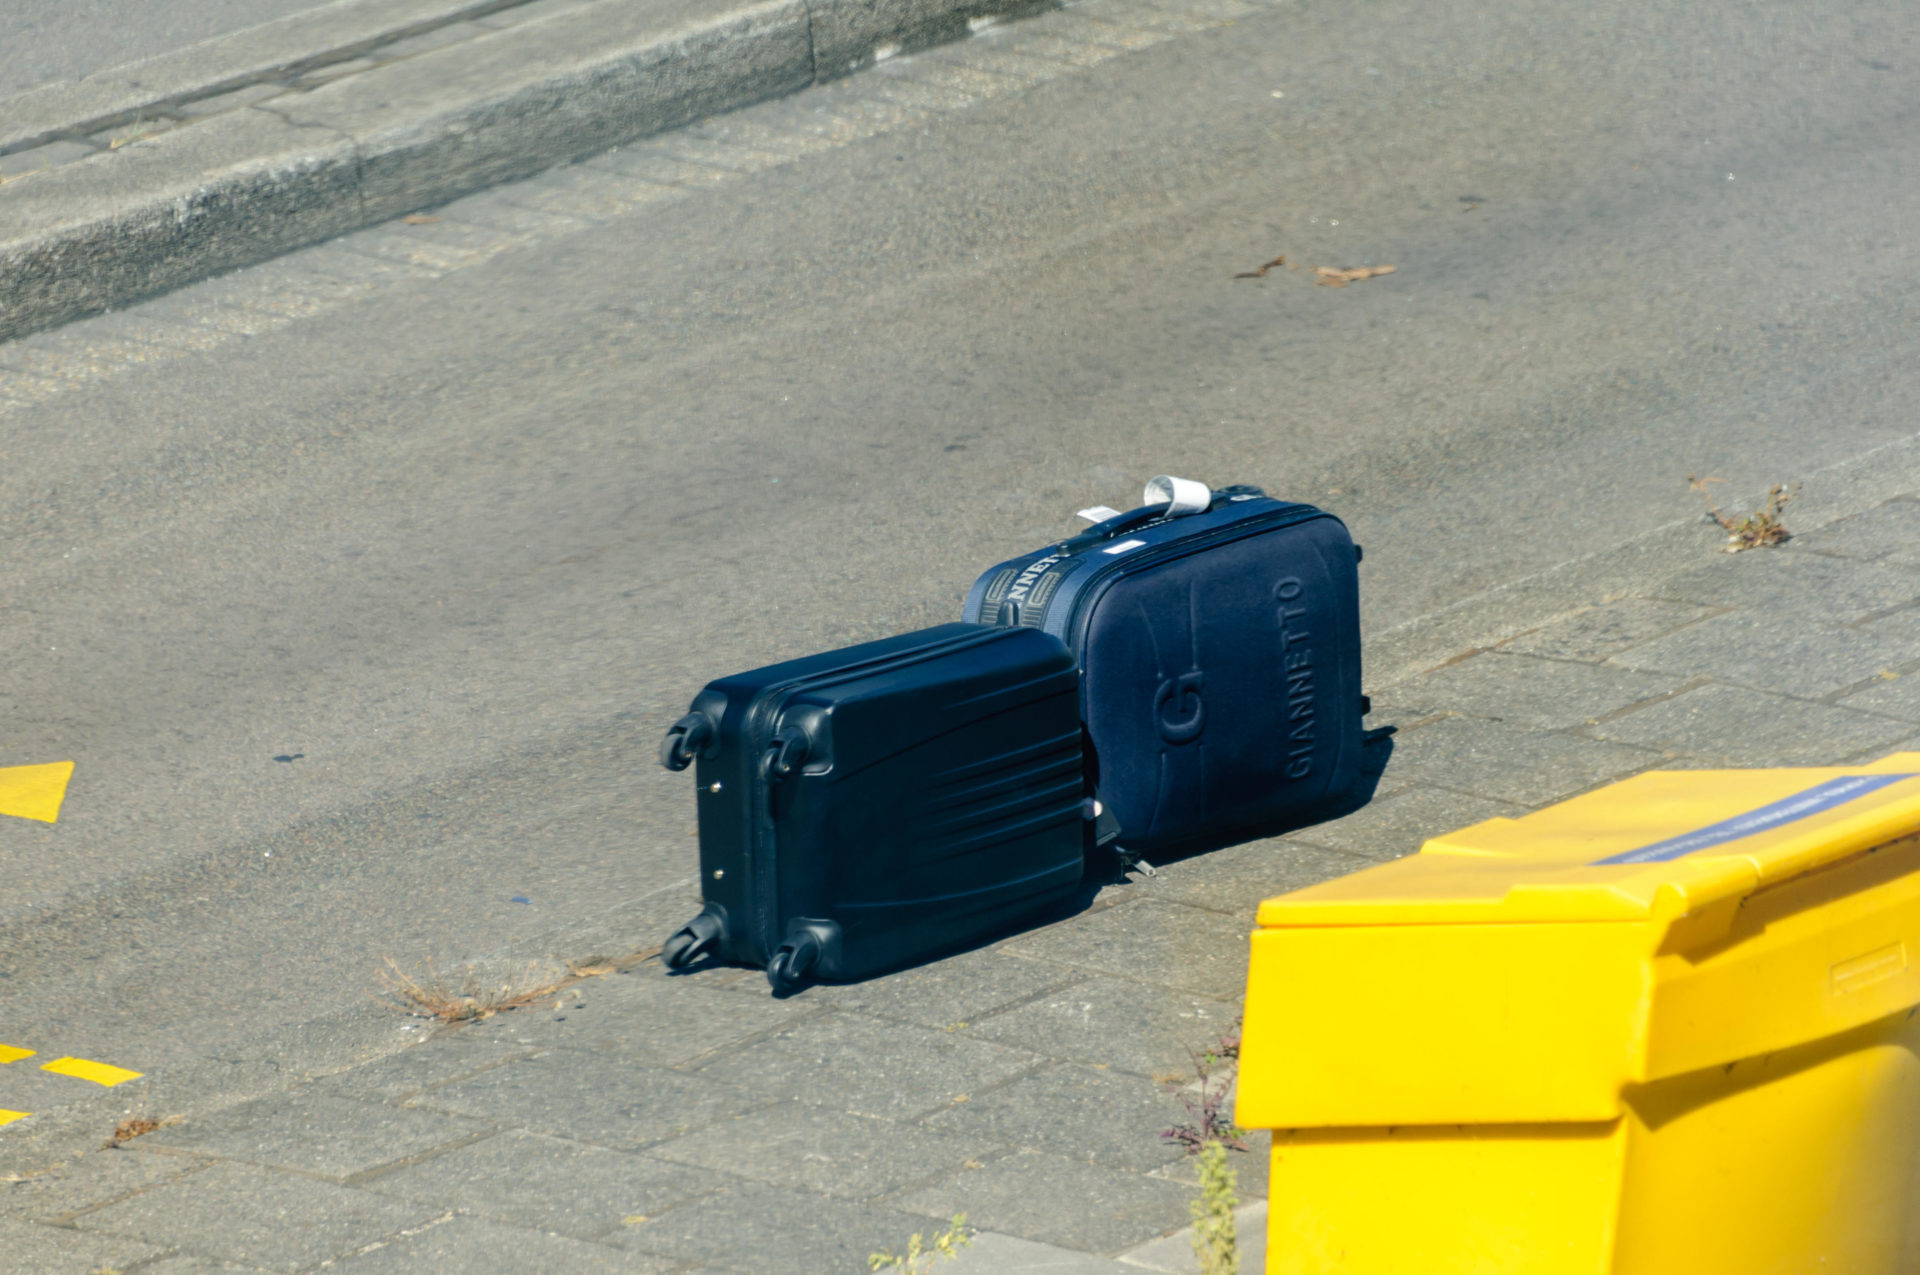 Passenger luggage suitcases lie on an airport road after falling off a baggage truck